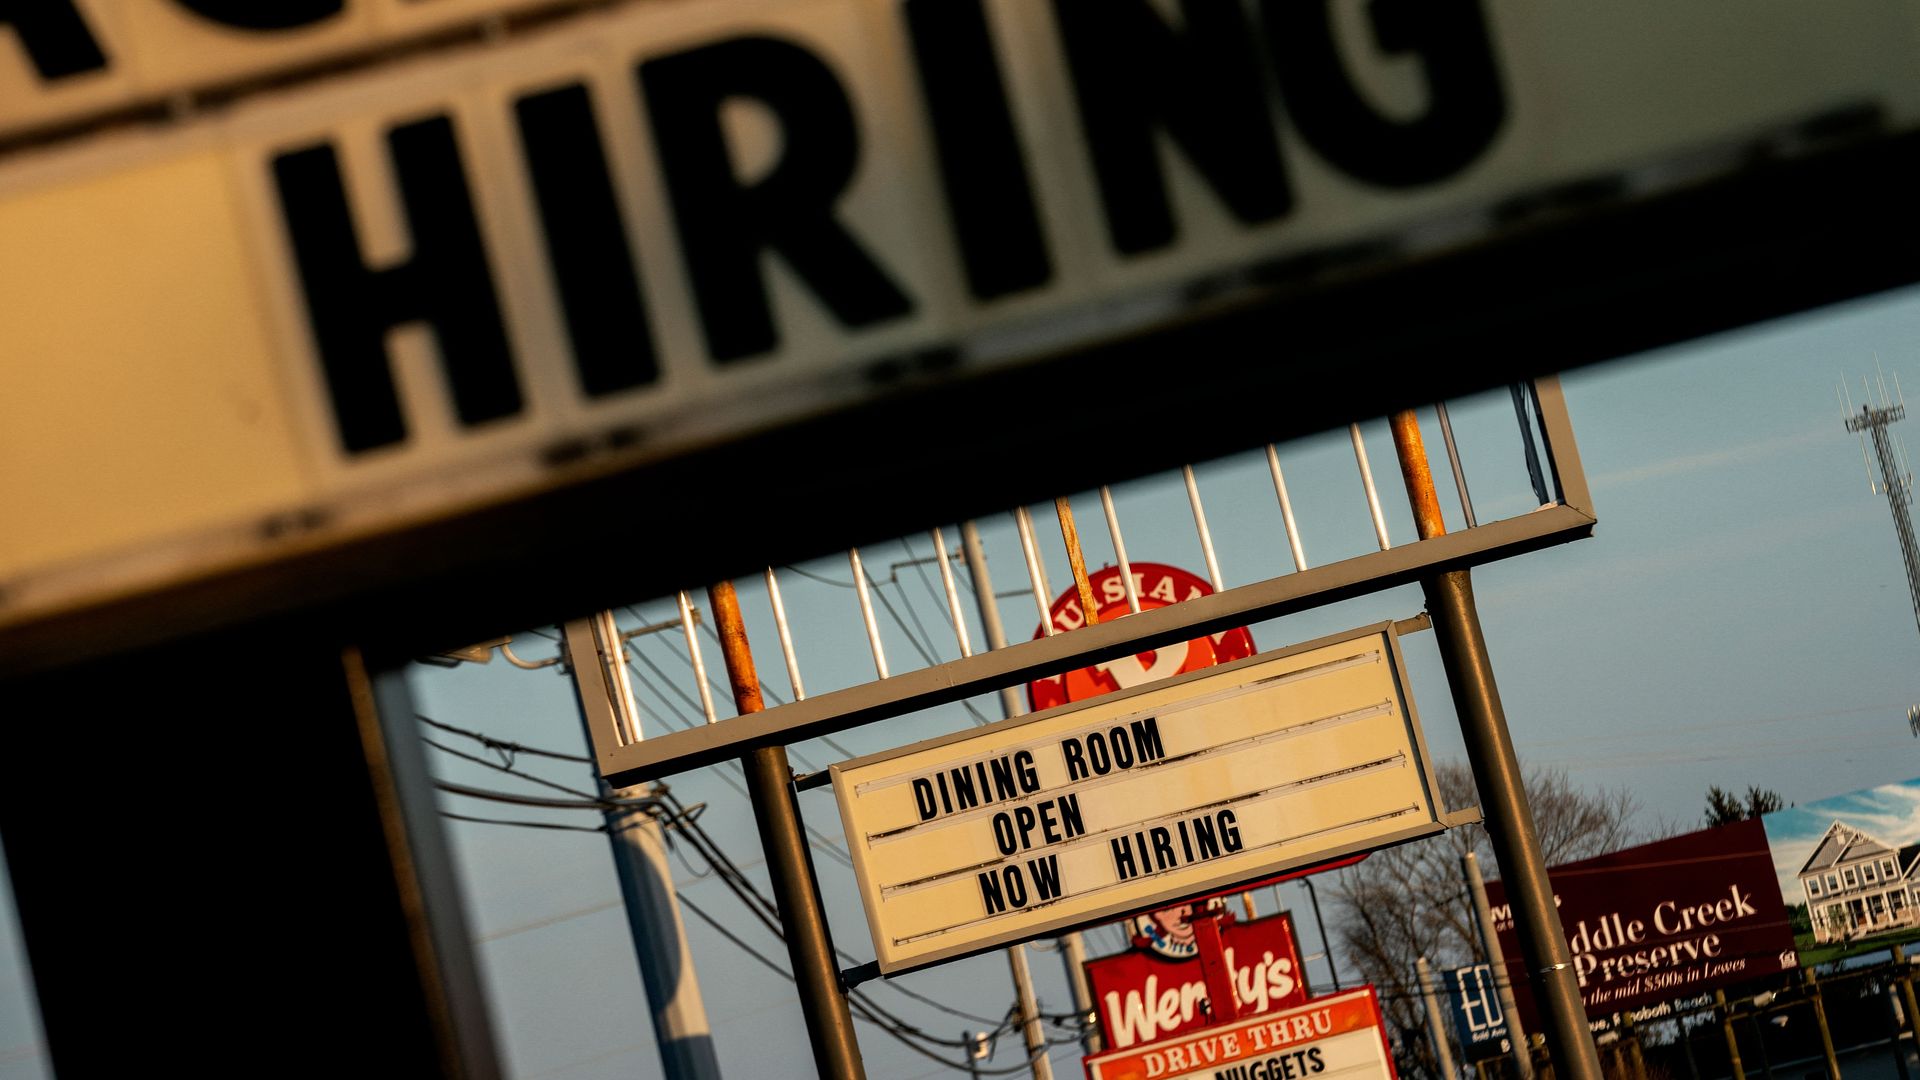 Now Hiring signs are displayed in front of restaurants in Rehoboth Beach, Delaware, on March 19, 2022